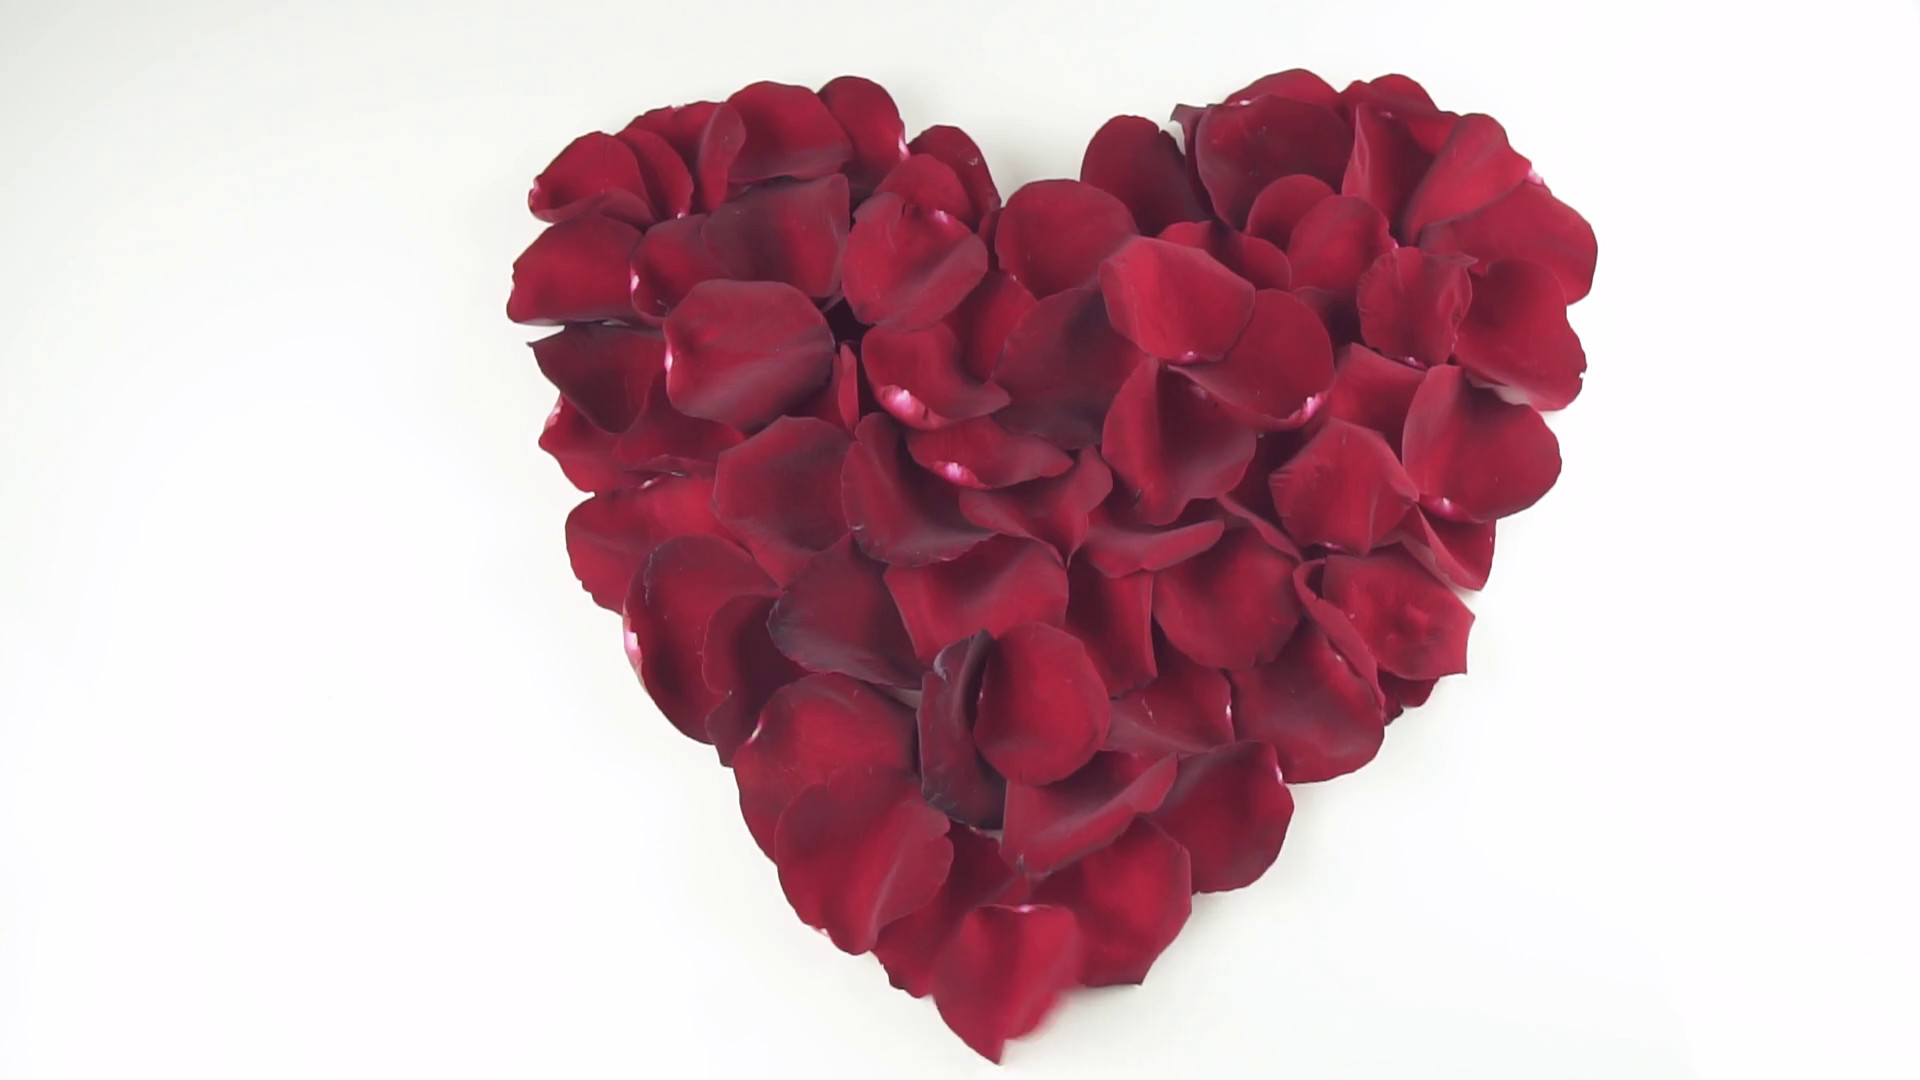 1920x1080 Heart shape of red rose petals blown off by the wind on white background  slow motion stock footage video Stock Video Footage - VideoBlocks